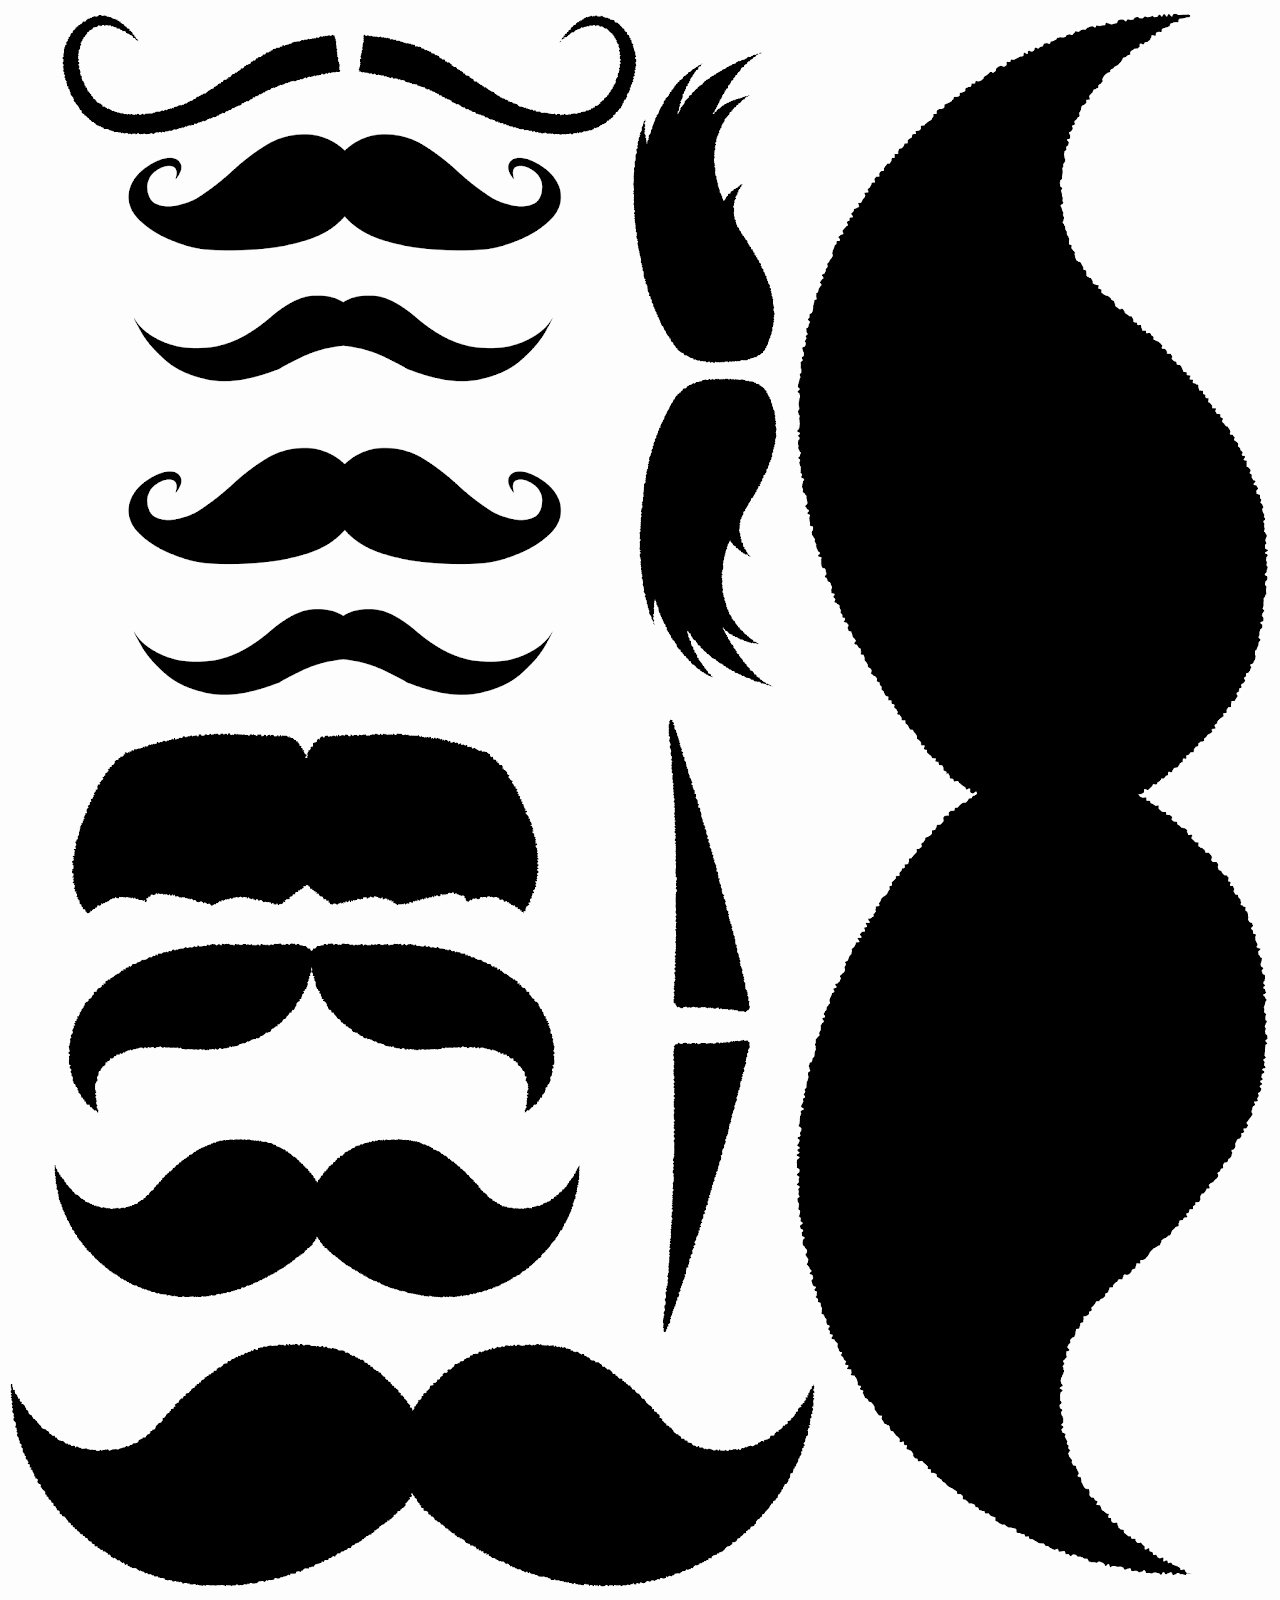 Lorax Mustache and Eyebrows Template Beautiful Template Mustache Seuss Dr and Lorax Eyebrows